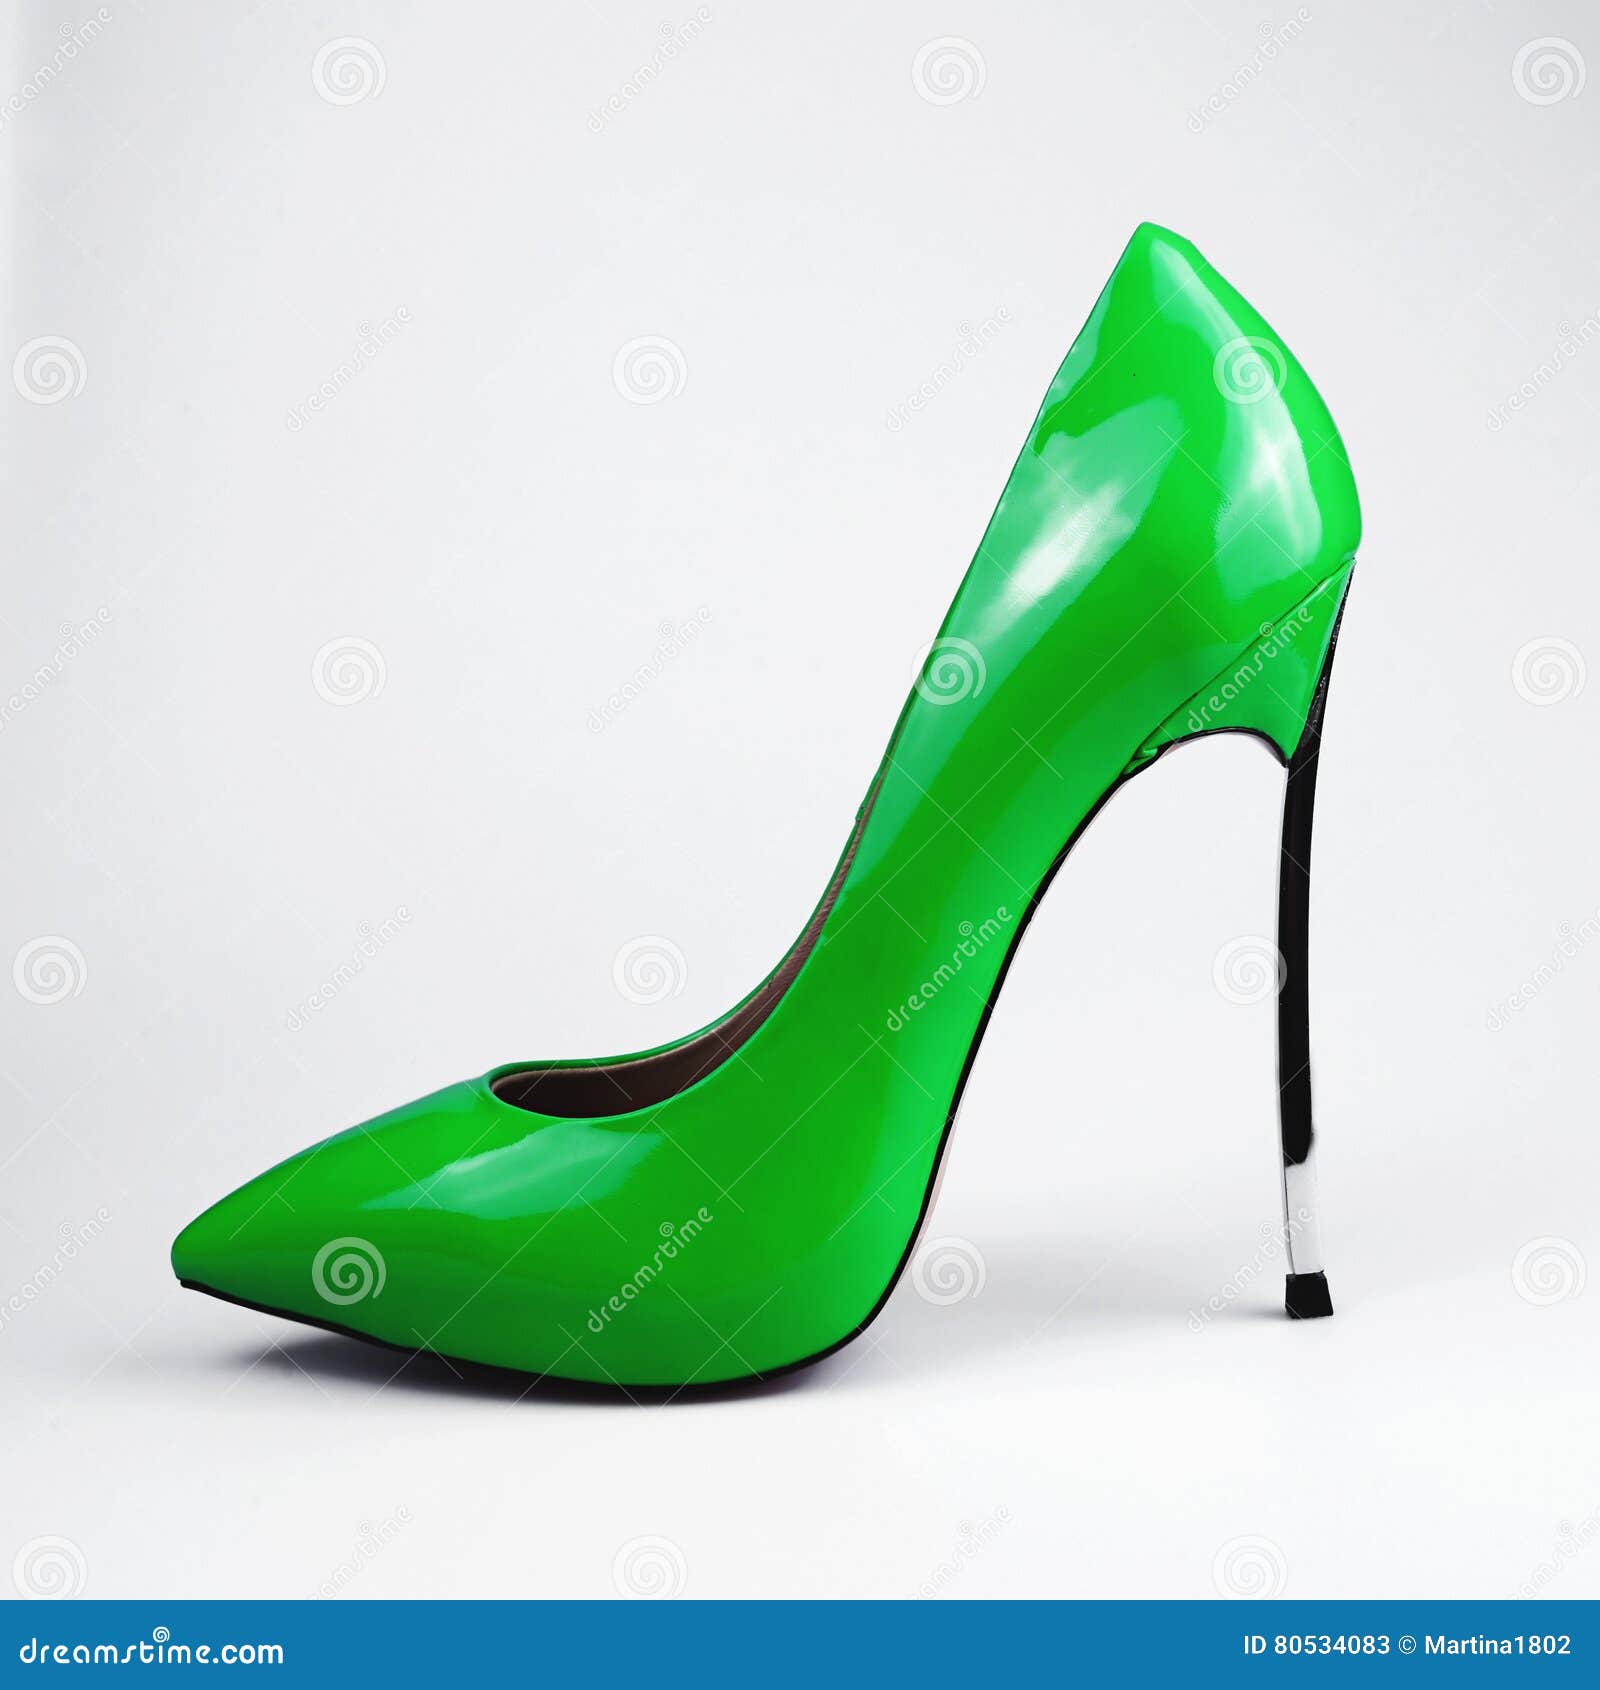 Female green shoes stock image. Image of style, step - 80534083